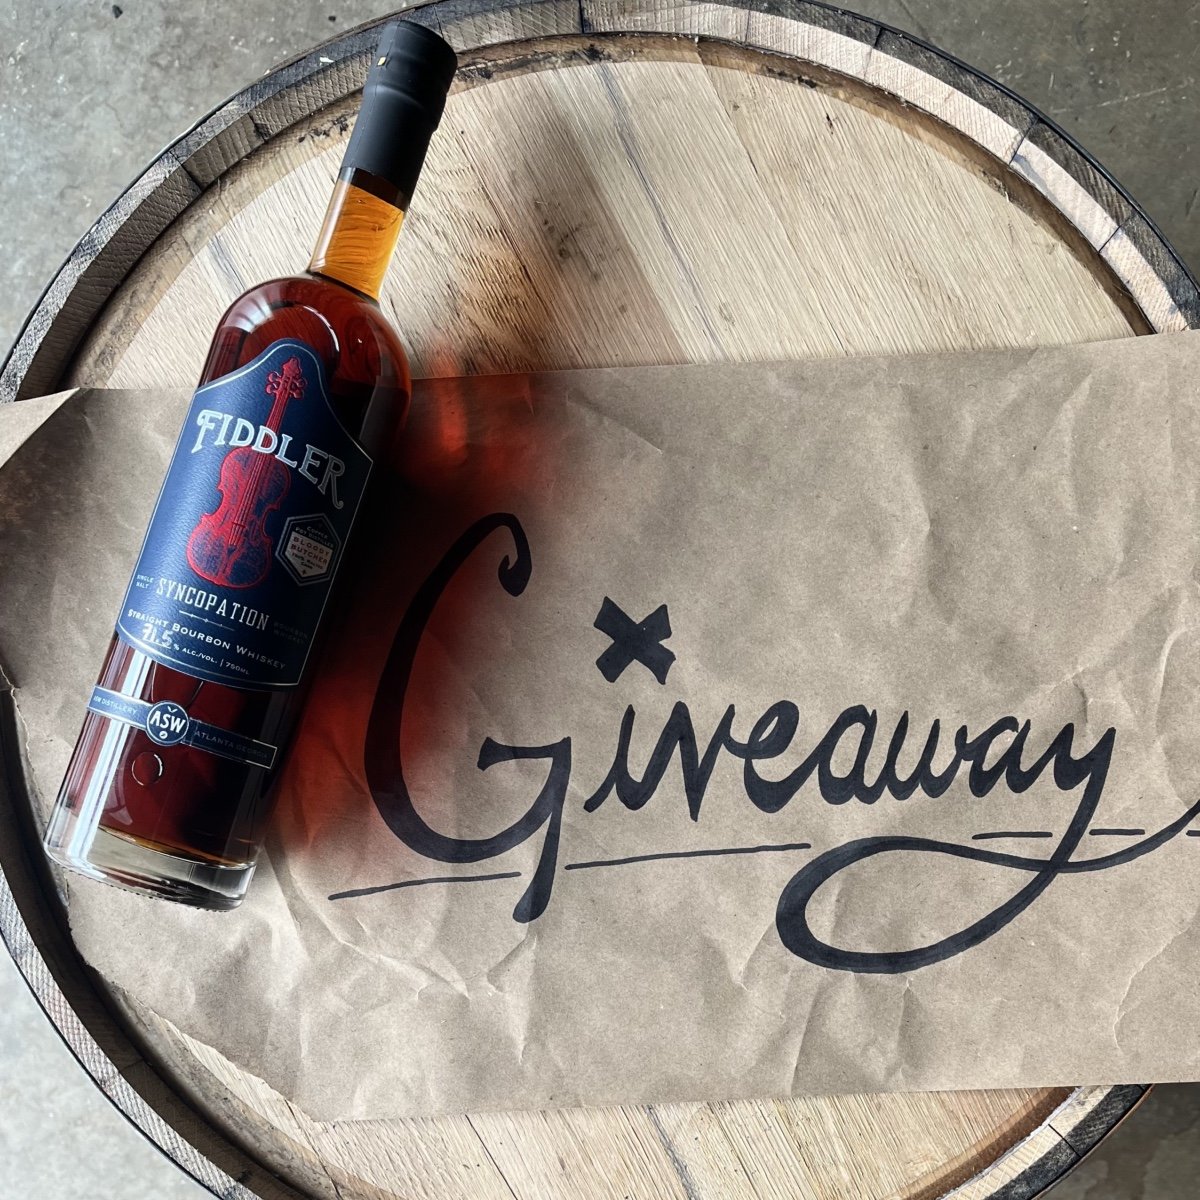 [ ⚡ HAZMAT GIVEAWAY ALERT ⚡ ] We're giving away 2 (very hazmat, i.e. 143 proof) bottle experiences of Fiddler Syncopation Single Malt Bourbon as part of the fun in anticipation of our 2nd annual Malt Maynia extravaganza this weekend, courtesy of Mast